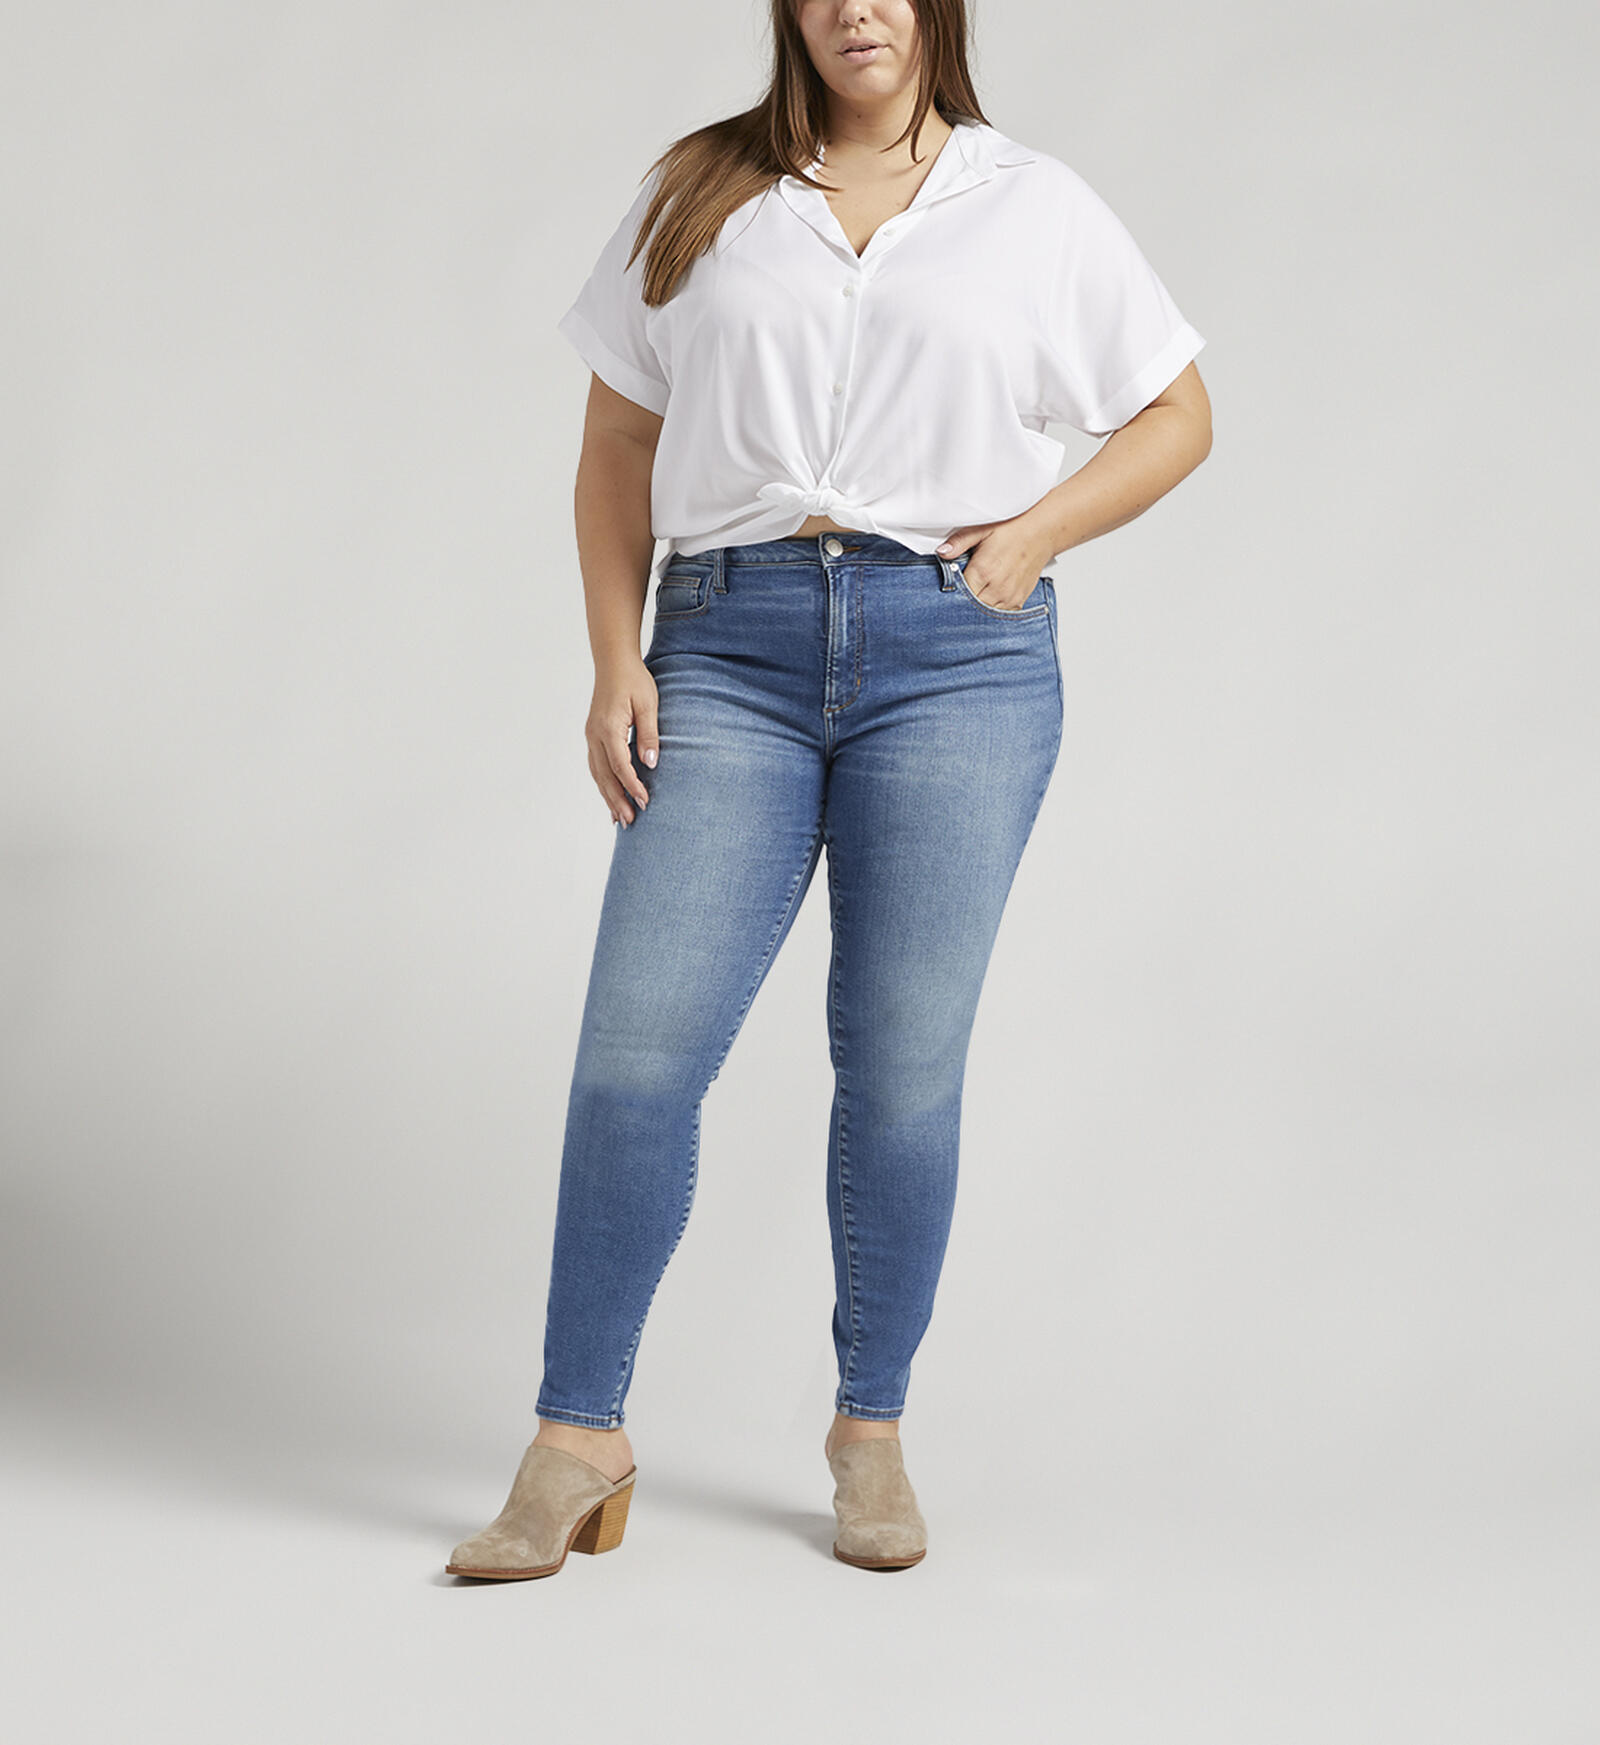 Buy Forever Stretch High Rise Skinny Jeans Plus Size for CAD 98.00